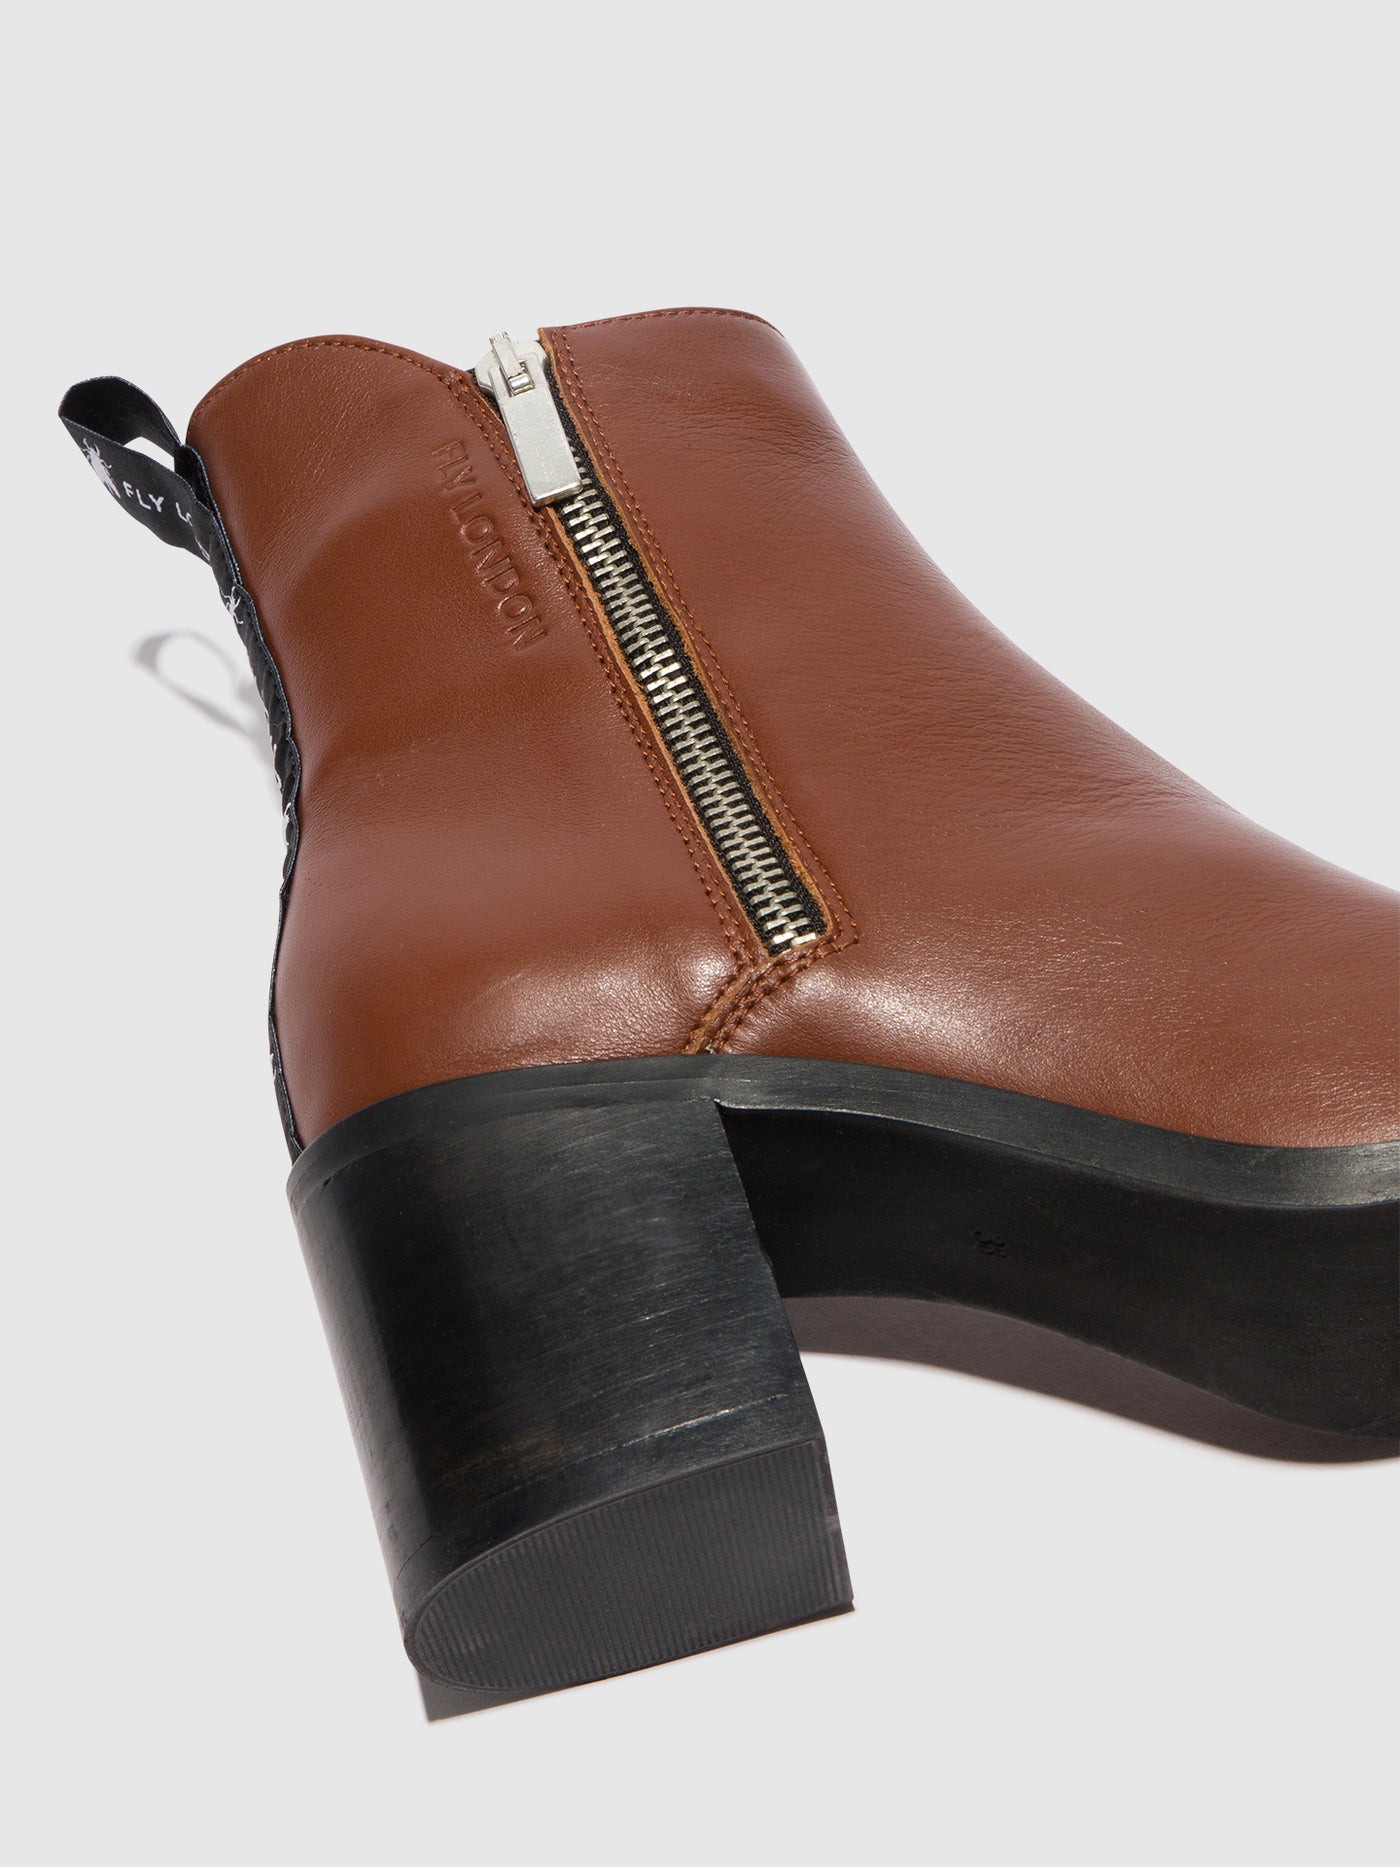 Zip Up Ankle Boots ADER912FLY COGNAC